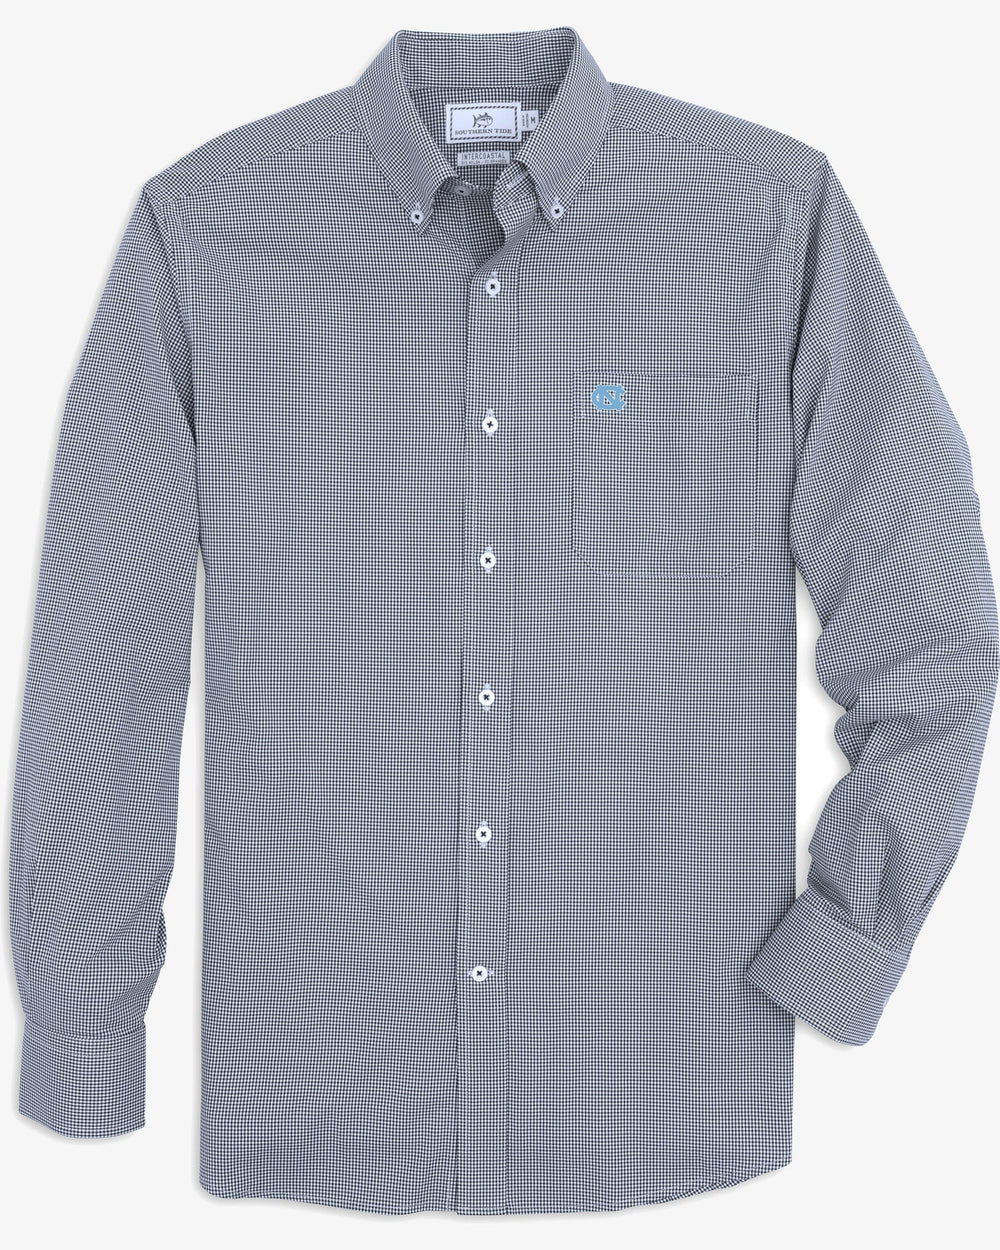 The front view of the Men's Light Blue UNC Tar Heels Gingham Button Down Shirt by Southern Tide - Navy